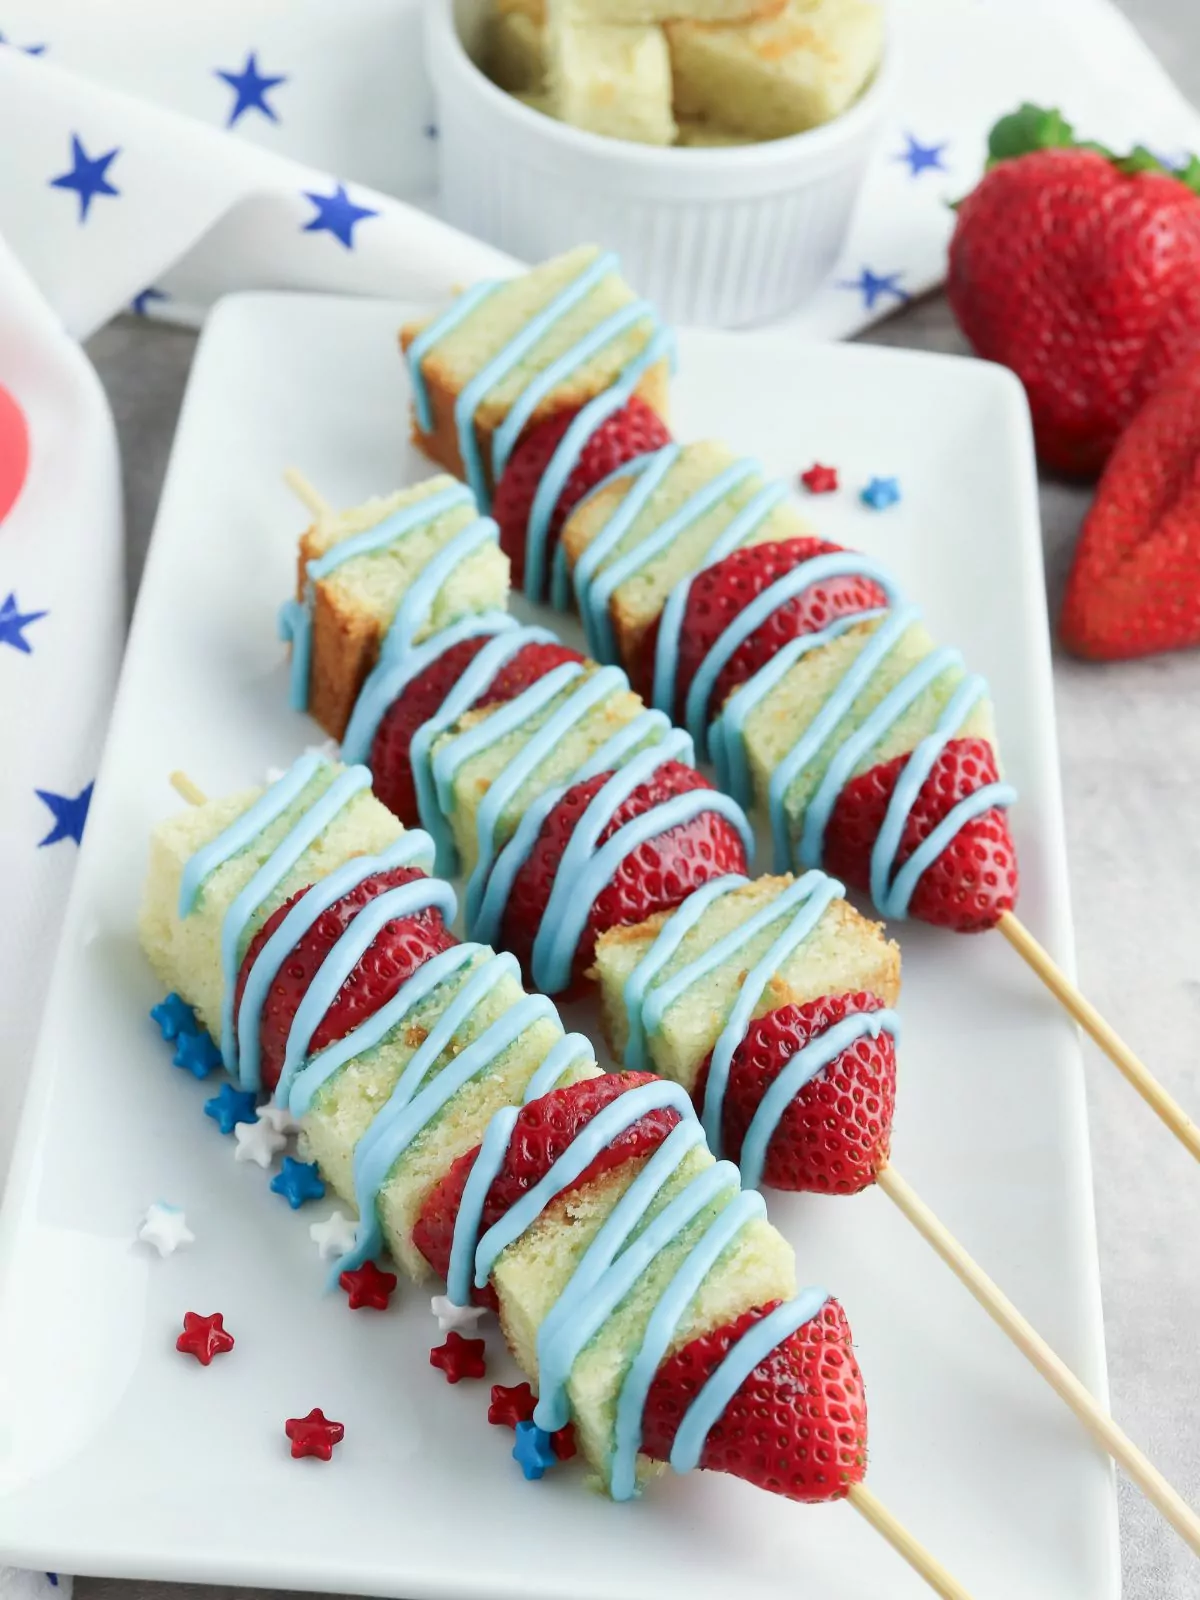 Patriotic fruit kabobs with strawberries, pound cake cubes, and blue powdered sugar glaze.